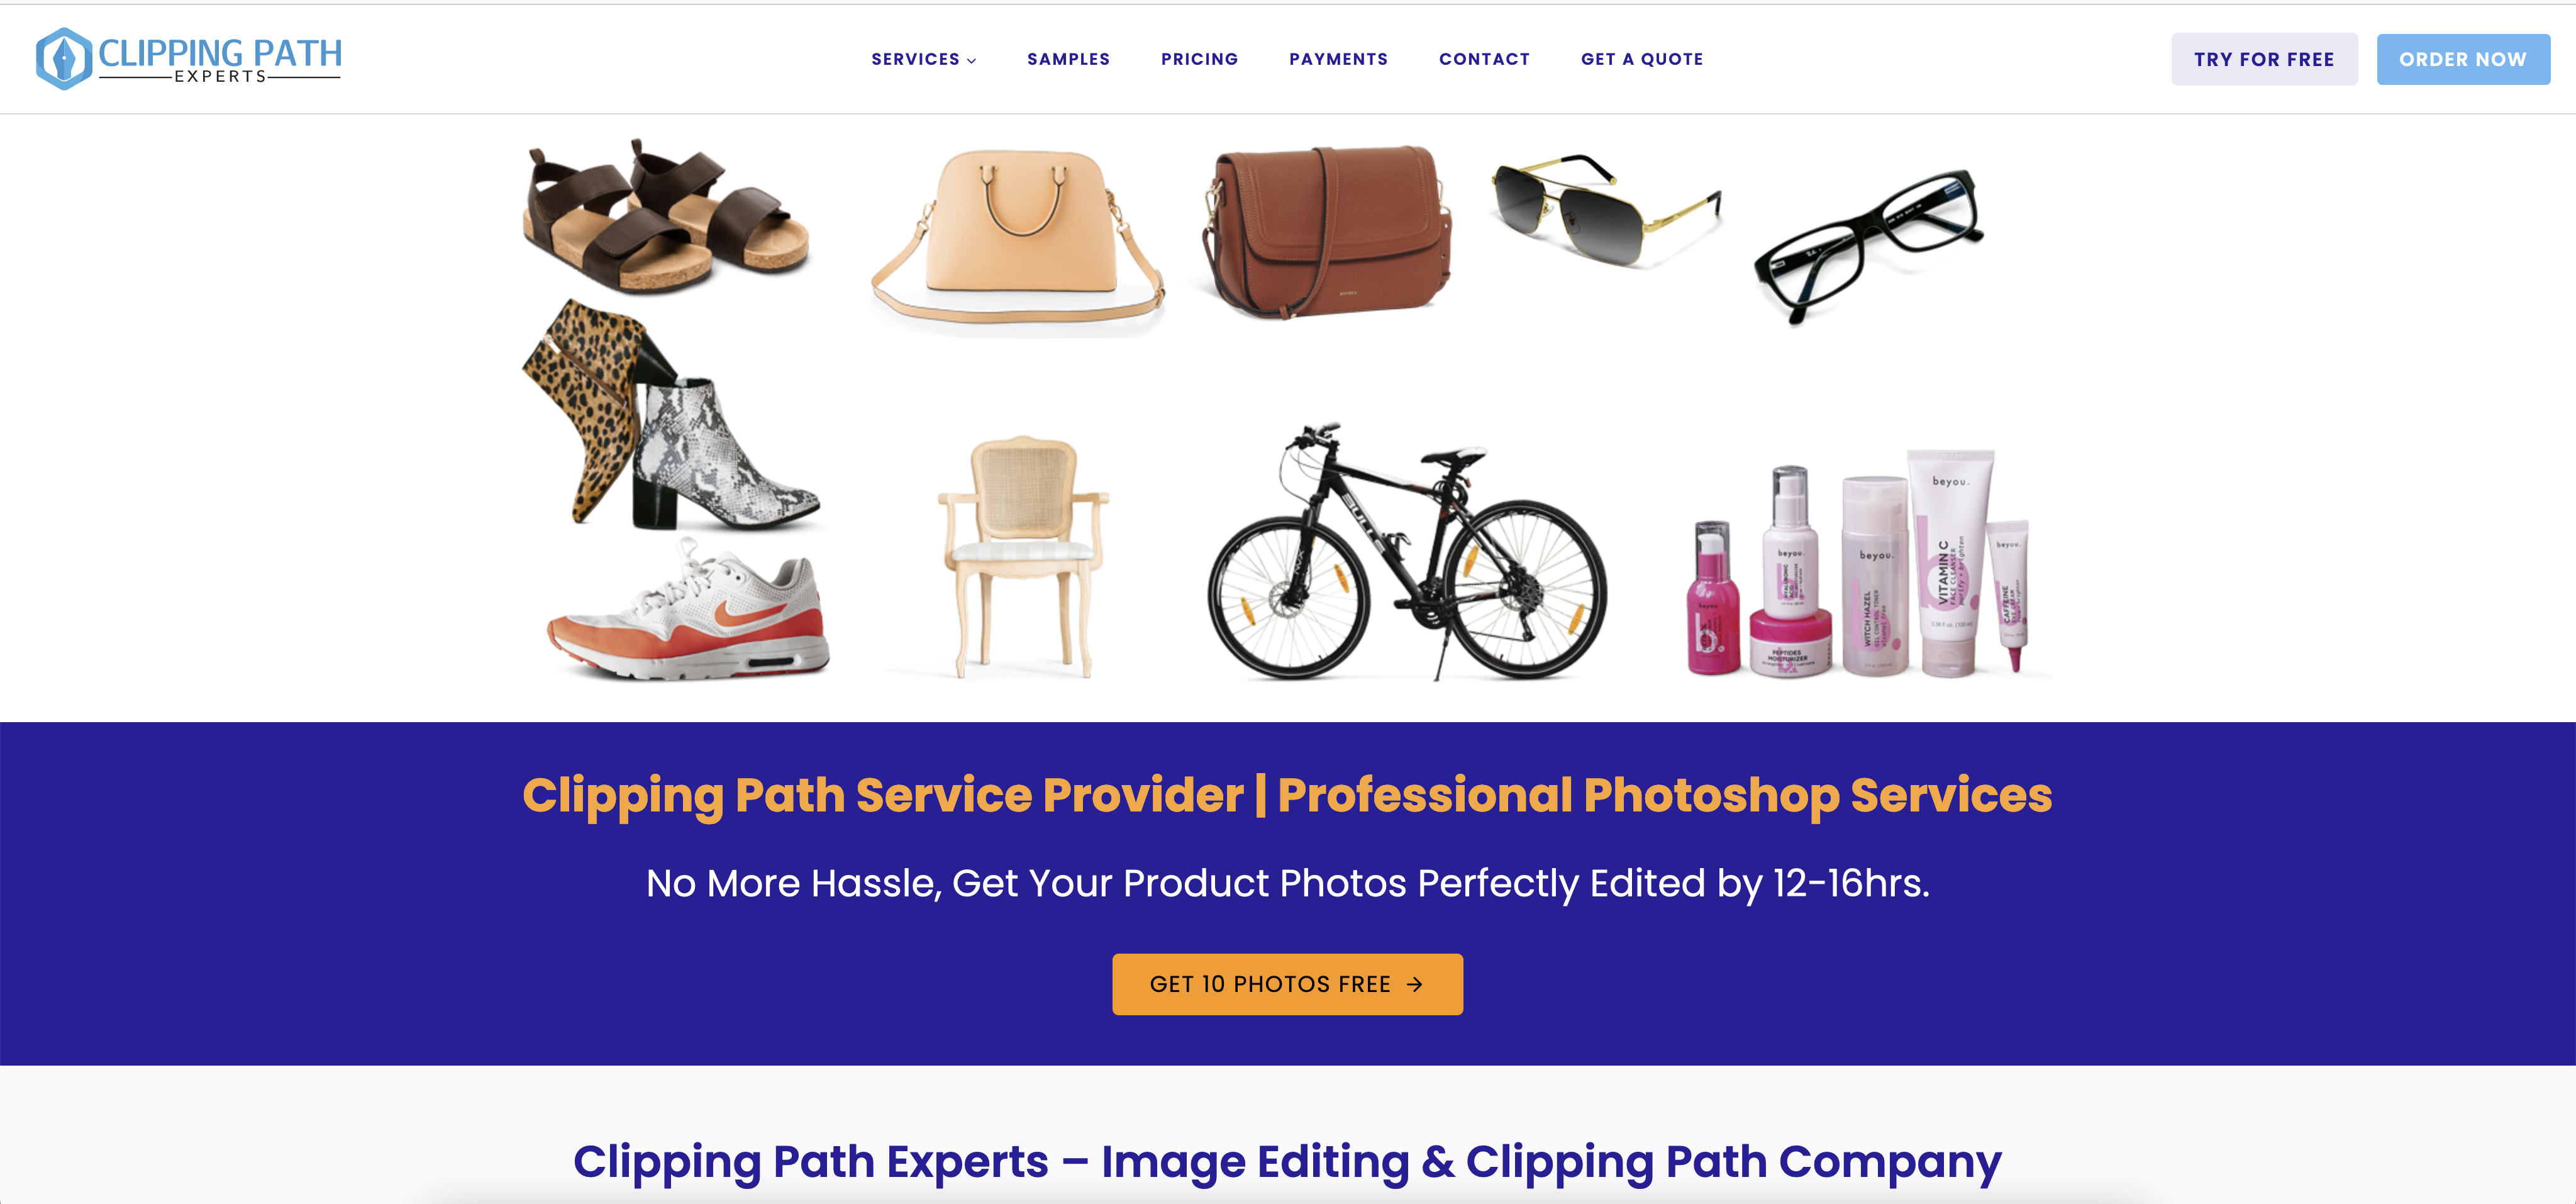 Clipping Path Experts Landing page